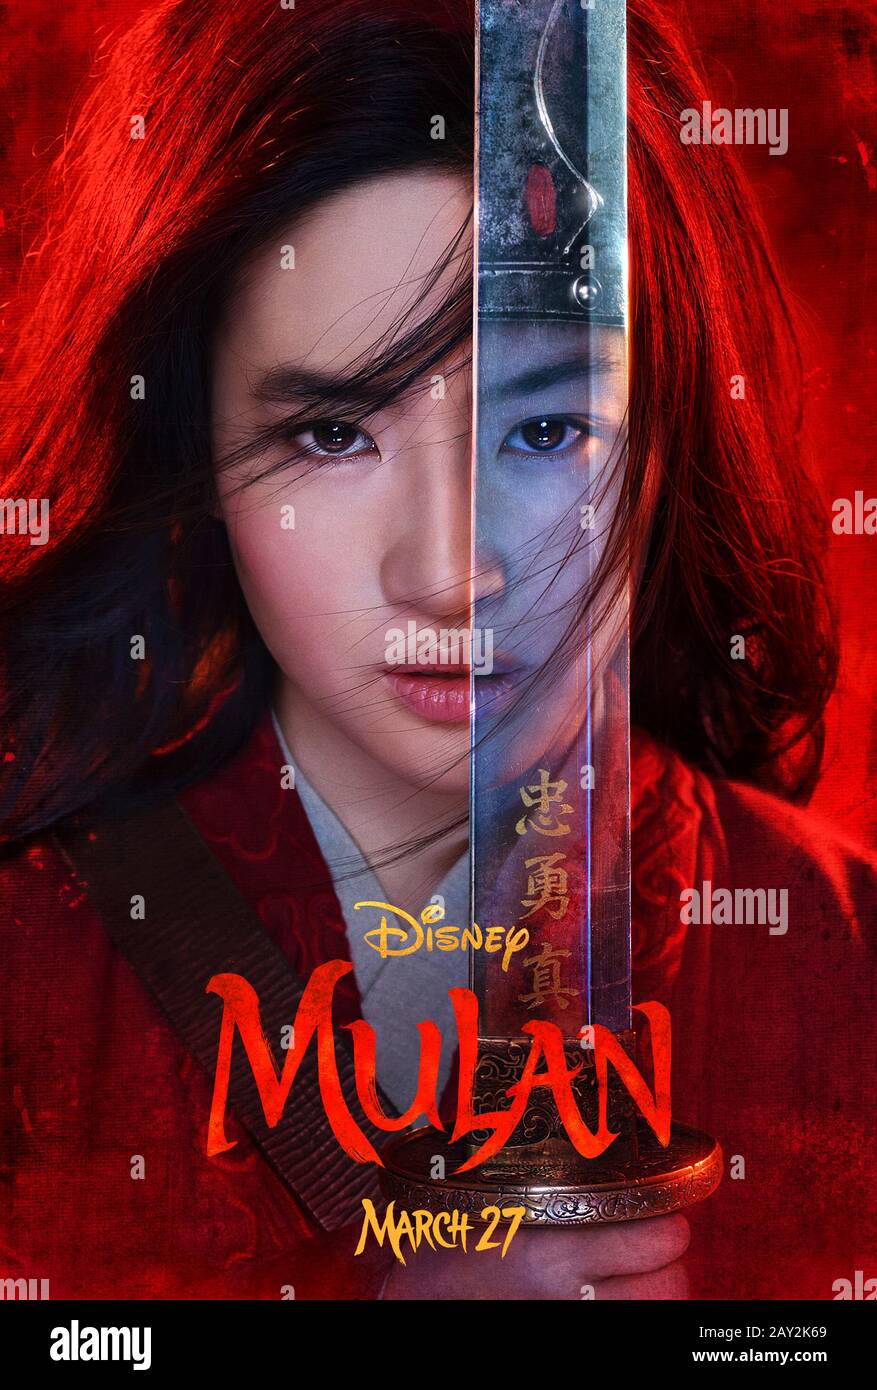 Mulan (2020) directed by Niki Caro and starring Yifei Liu, Donnie Yen, Jet Li and Li Gong. Live action reboot of Disney's 1998 animation about a Chinese woman who disguises herself as a man to save her father. Stock Photo